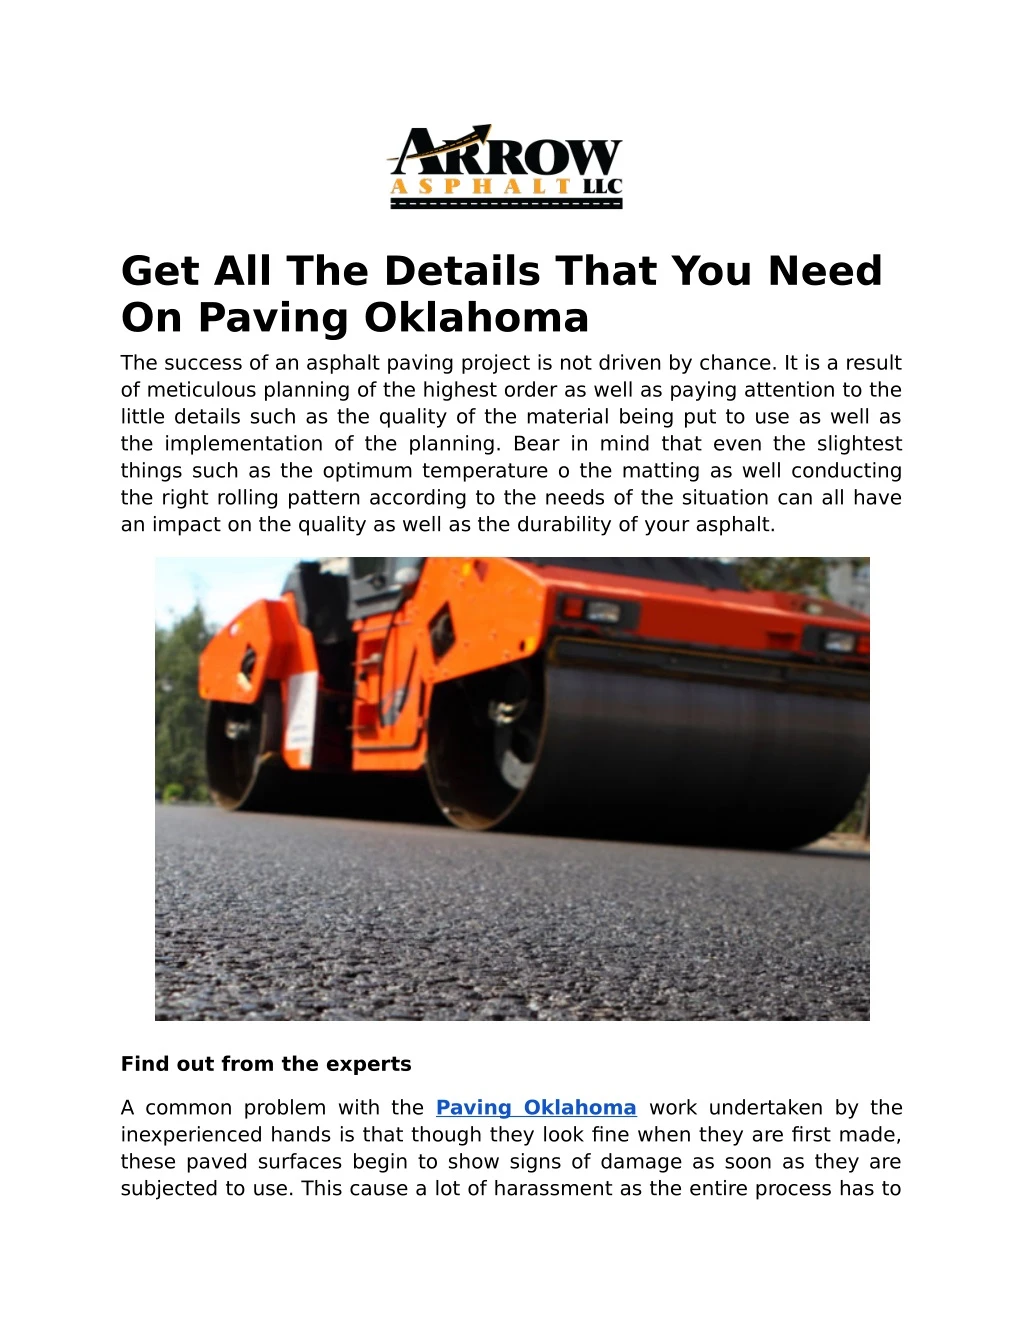 get all the details that you need on paving